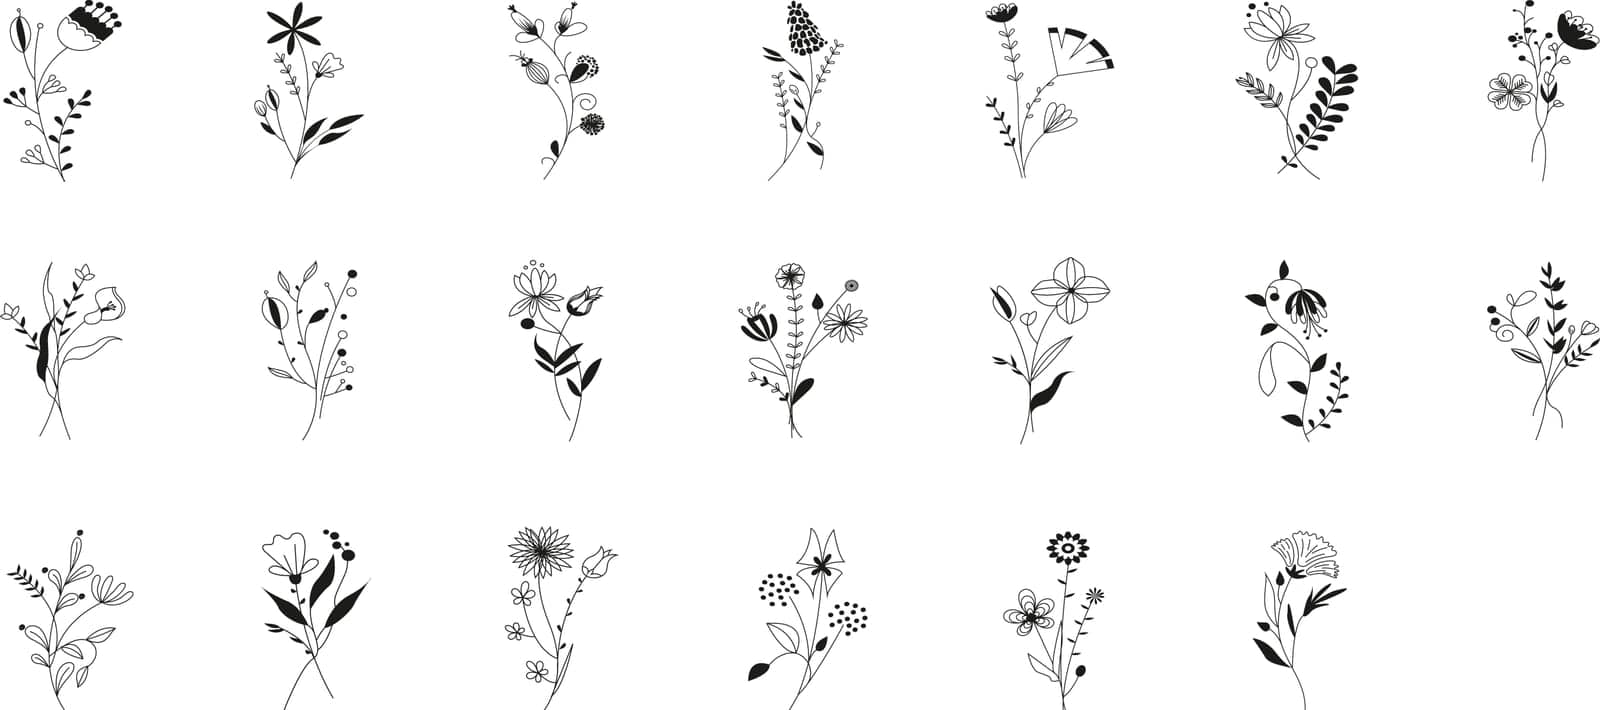 Black and white illustration ginkgo biloba, ginko, eucalyptus, maple, oak, herbs. Vector leaves branches set isolated on transparent background. Decorative vintage elements for decoration collection